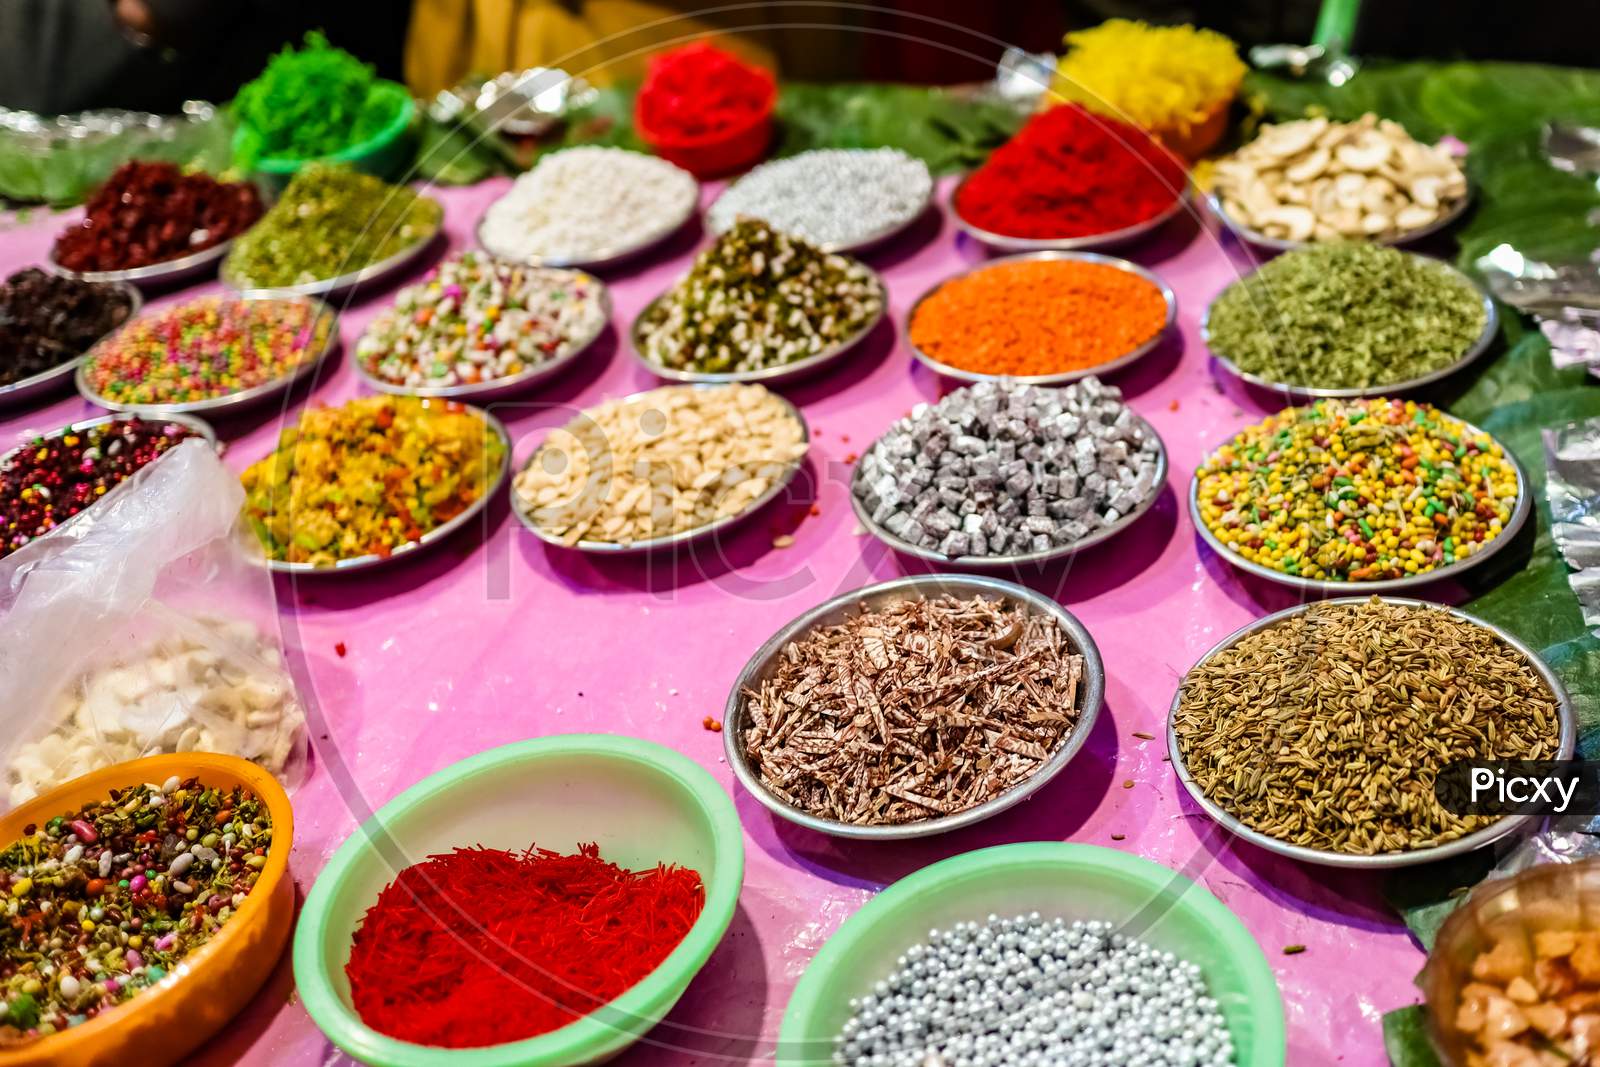 Different Types Of Colorful Garnish Pan Masala Used To Decorate Betel Leaf Banarasi Paan With Selective Focus And Blurred Background